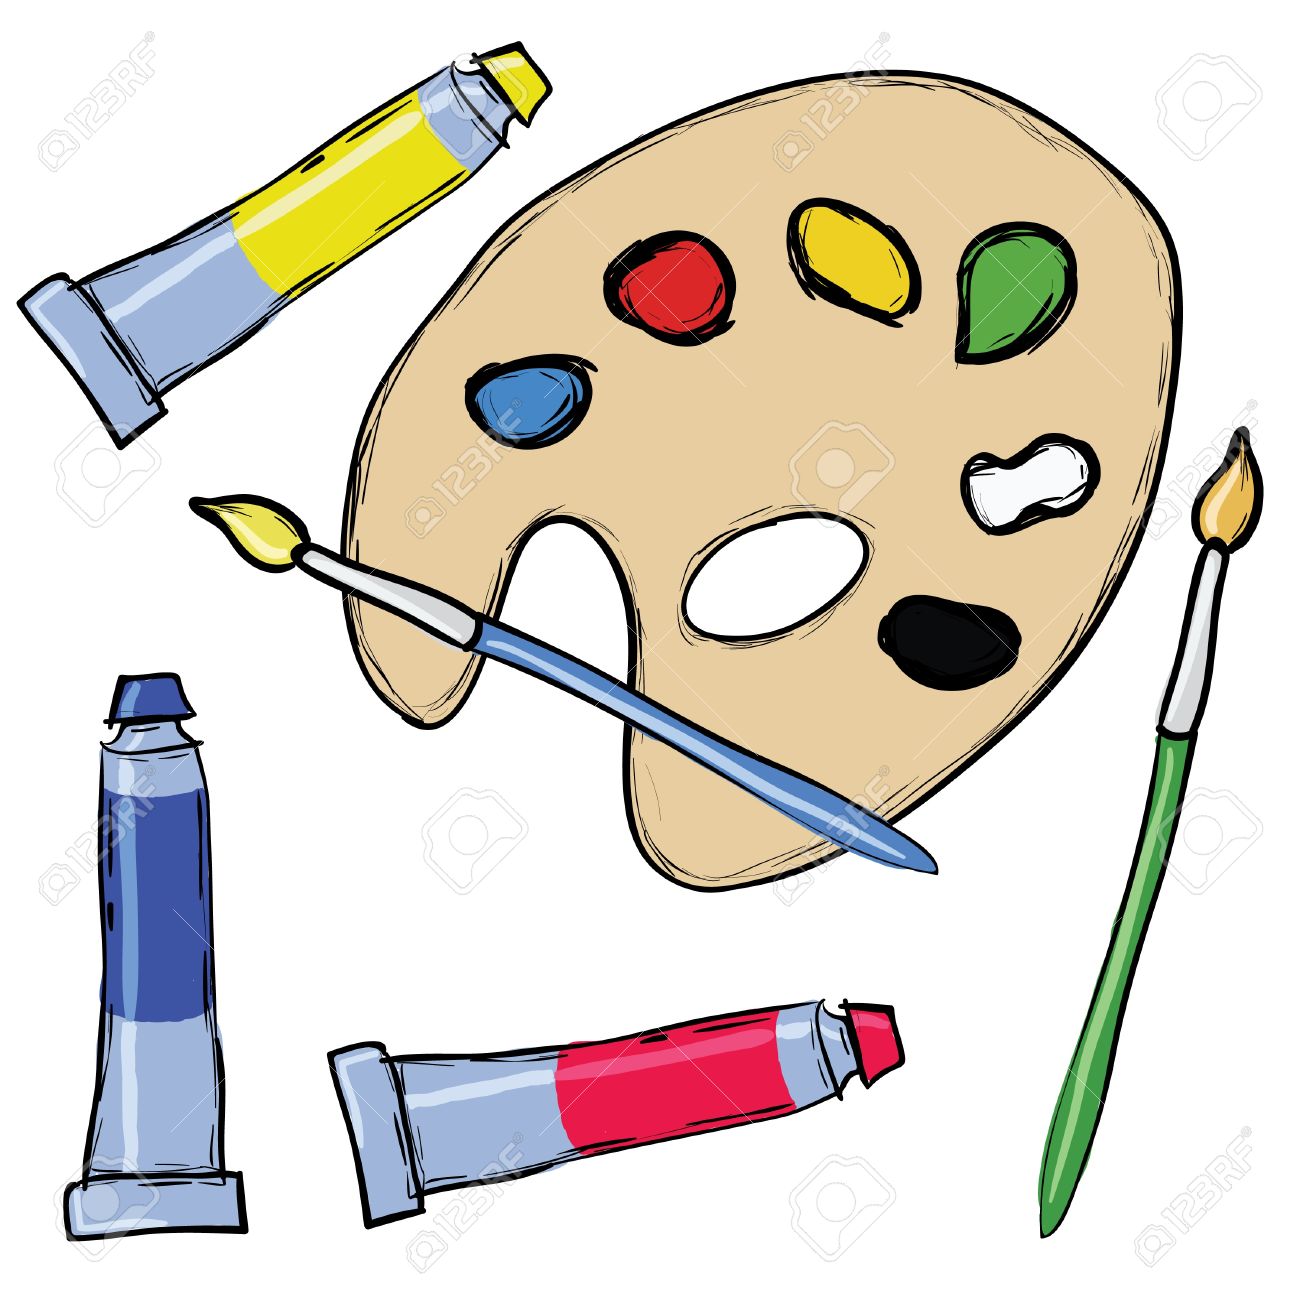 painting clipart acrylic